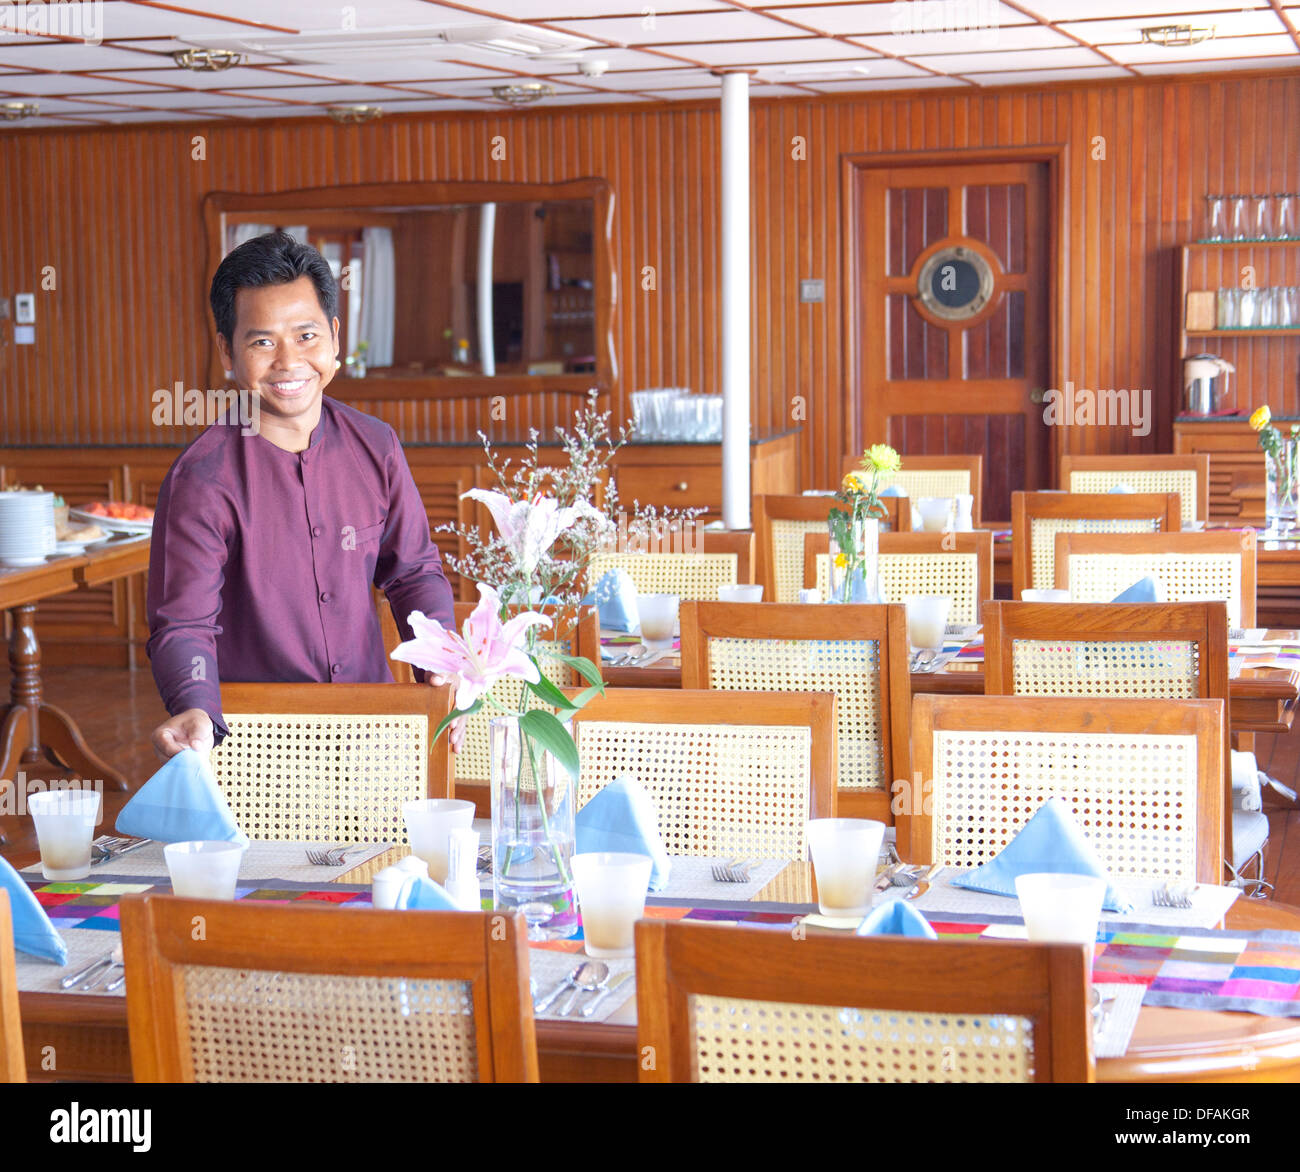 Dining room in Mekong River Cruise Ship Stock Photo